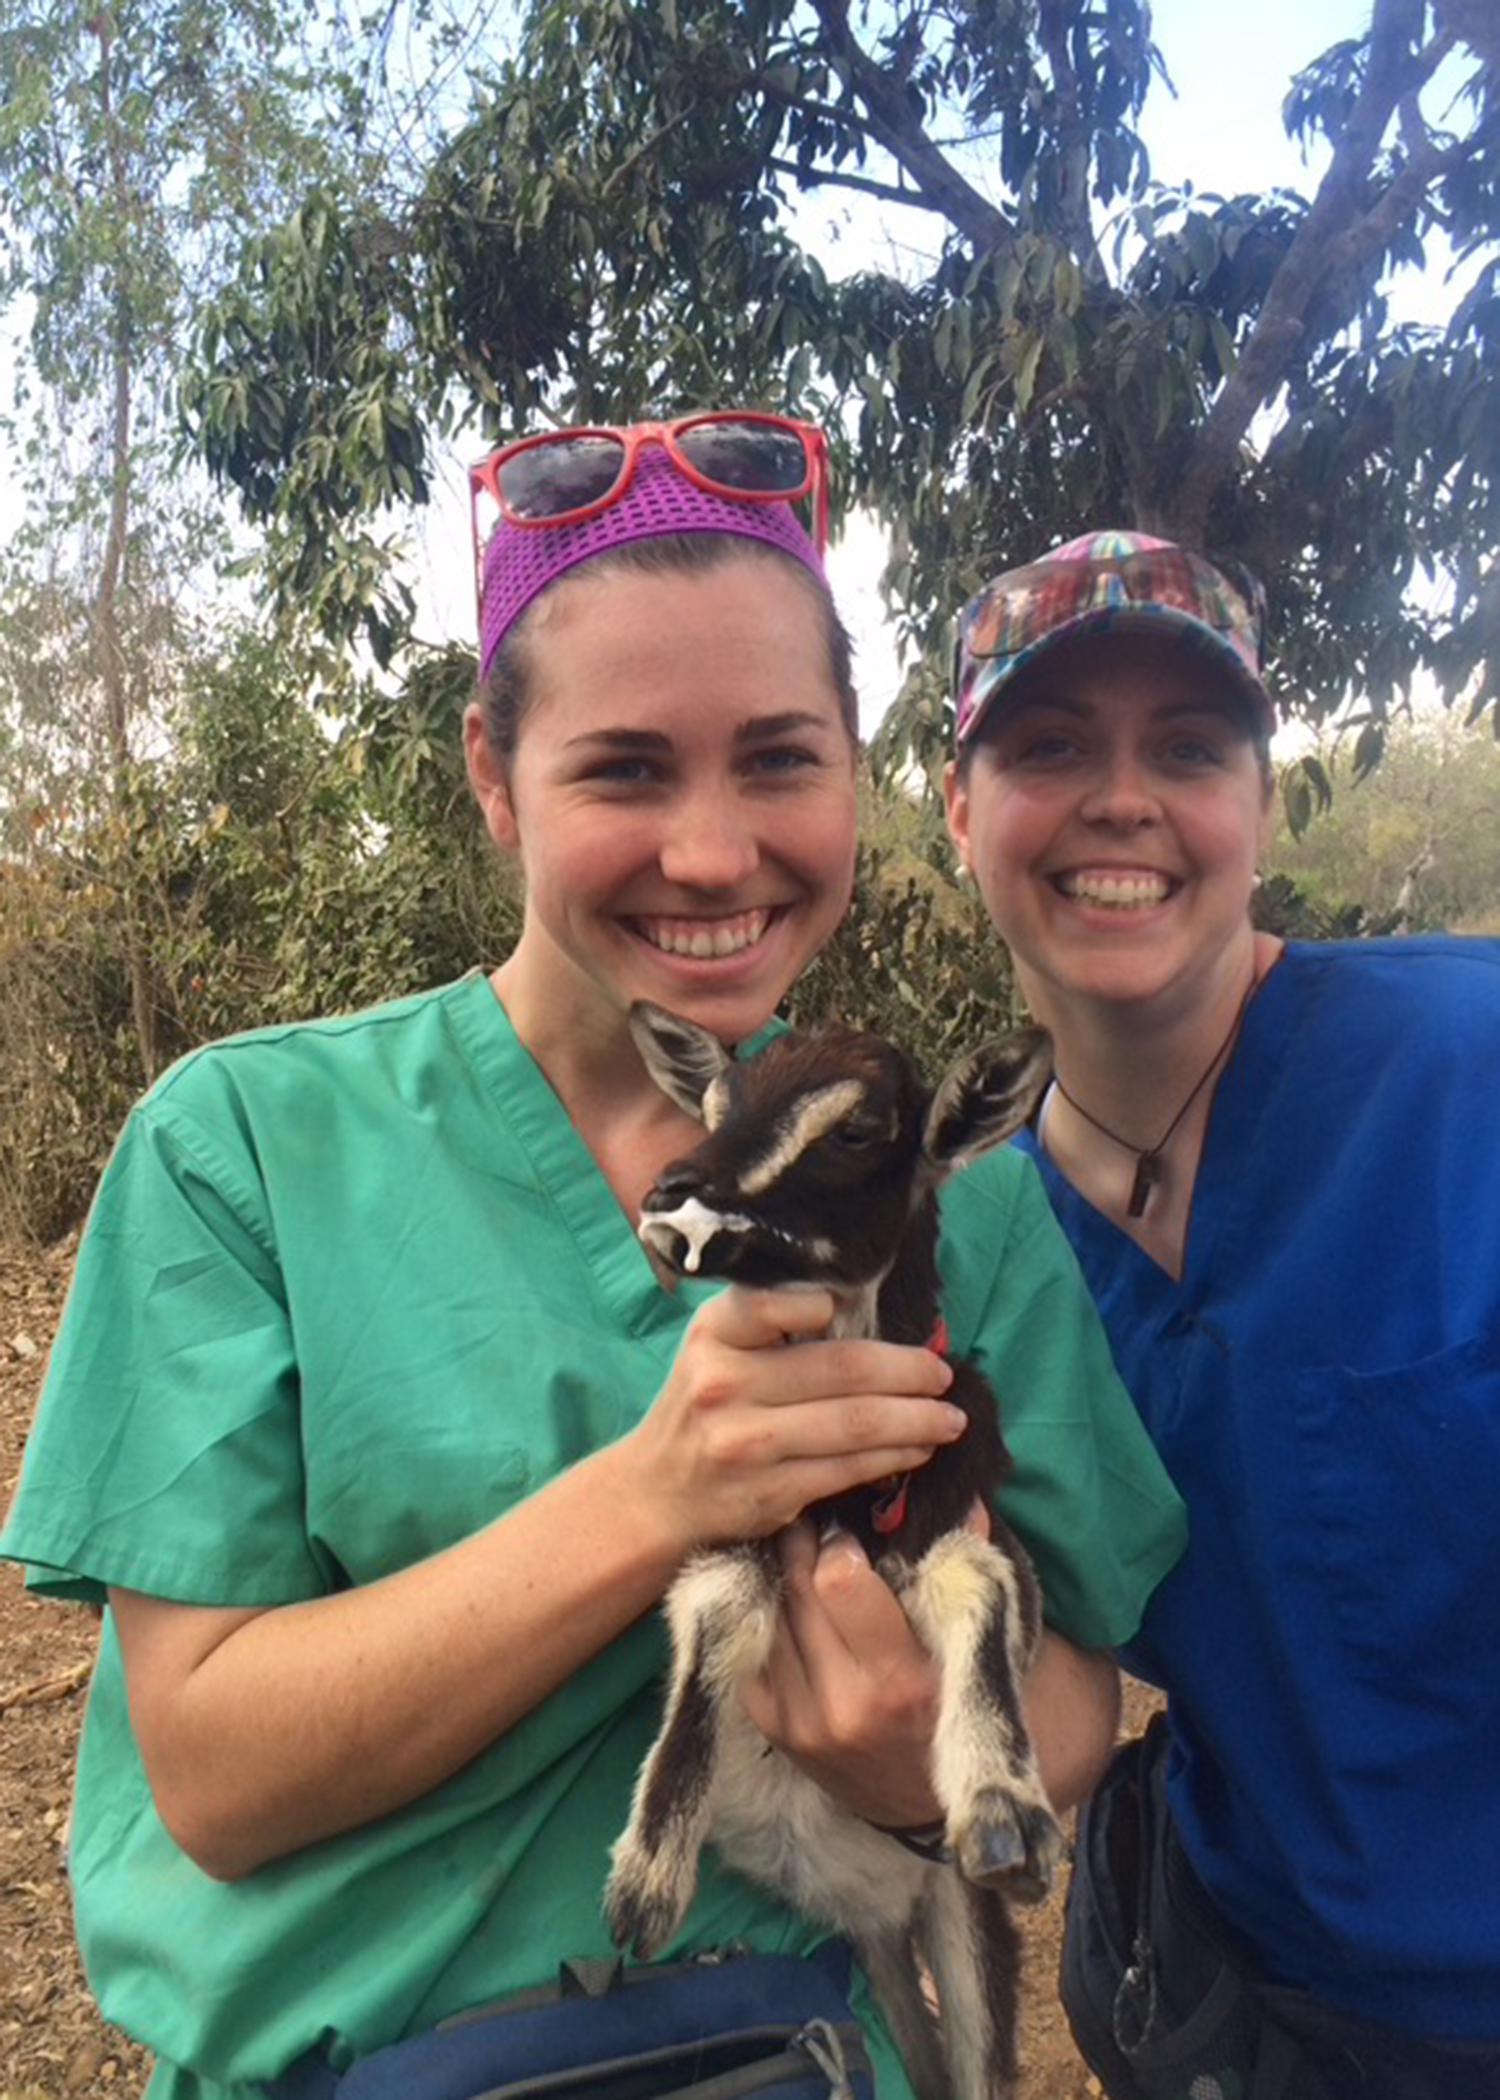 Mississippi State University College of Veterinary Medicine student Jessica Taylor, left, and MSU Department of Animal and Dairy Sciences instructor Jessica Graves spent time volunteering in Haiti as part of a project to improve animal and public health. (Submitted photo)